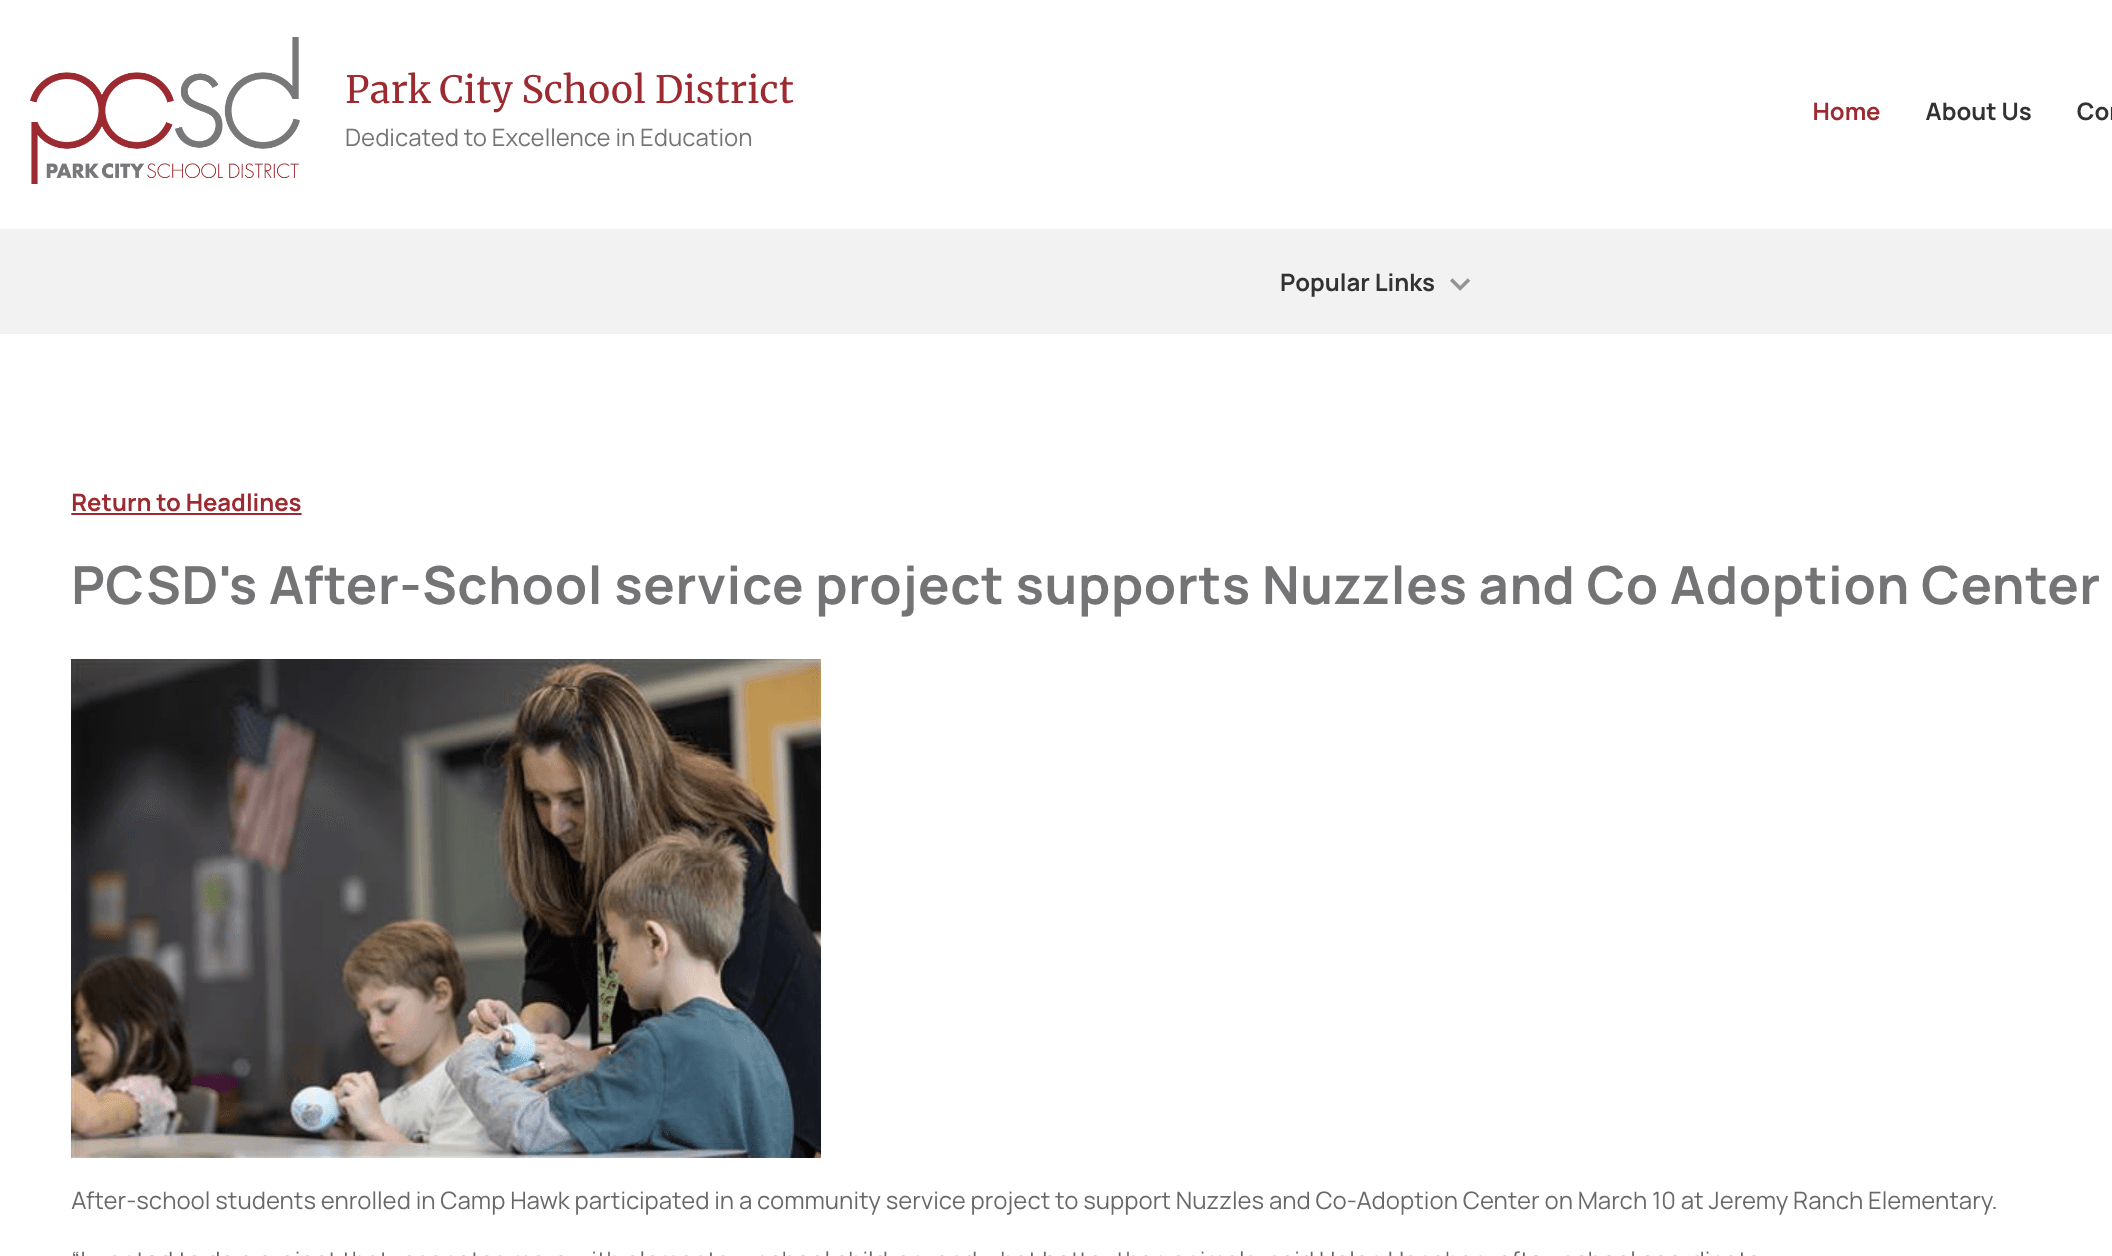 PCSD's After-School Service Project Supports Nuzzles & Co Adoption Center